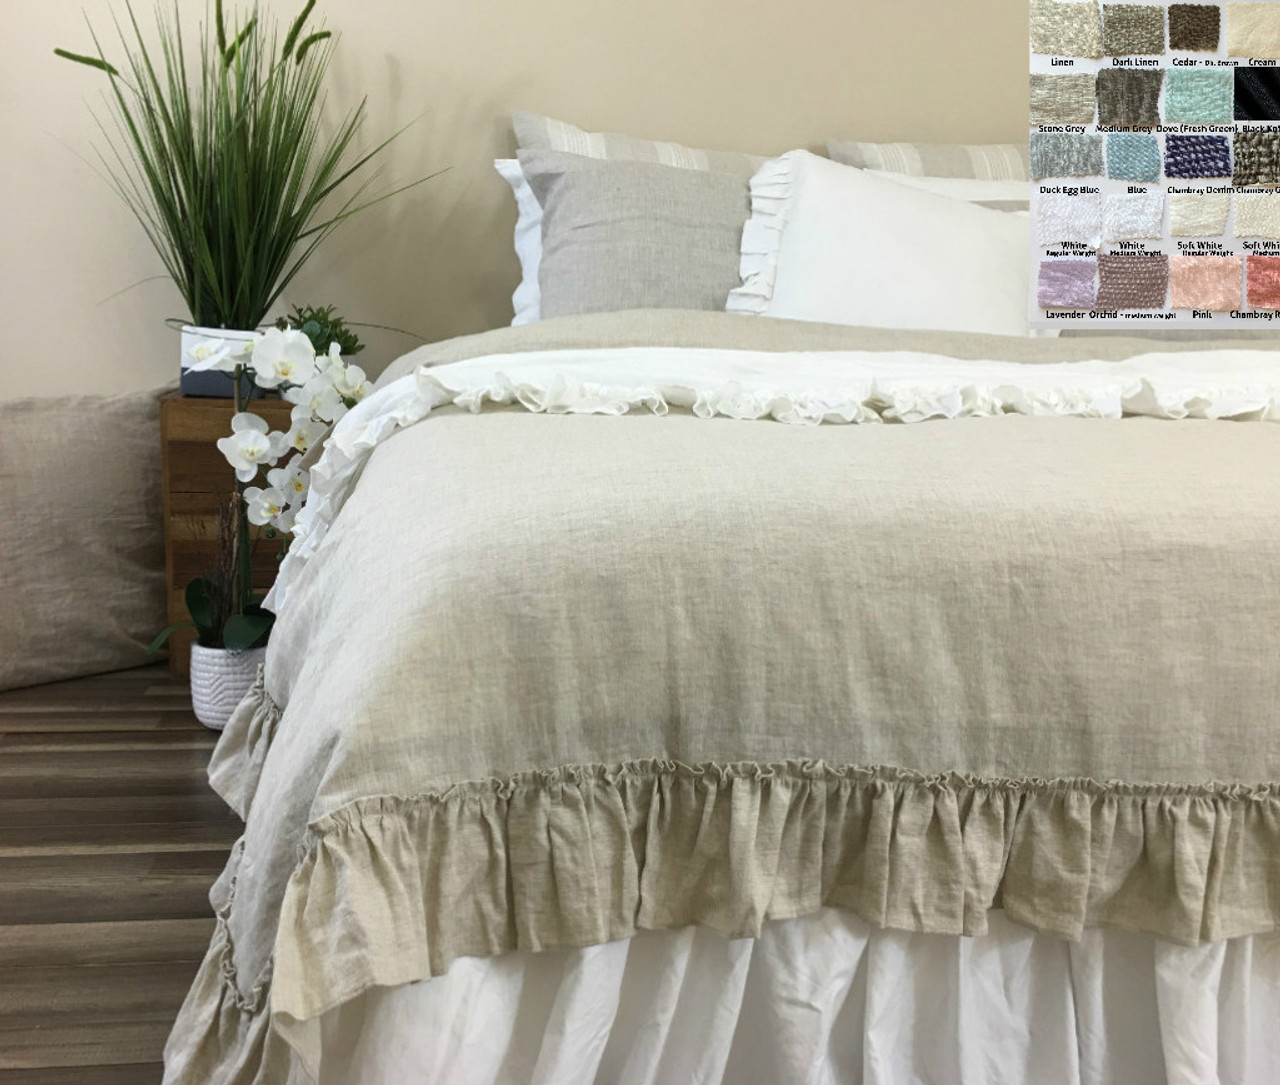 Ruffled Pinstripe Duvet Cover in Grey and White, Natural Linen